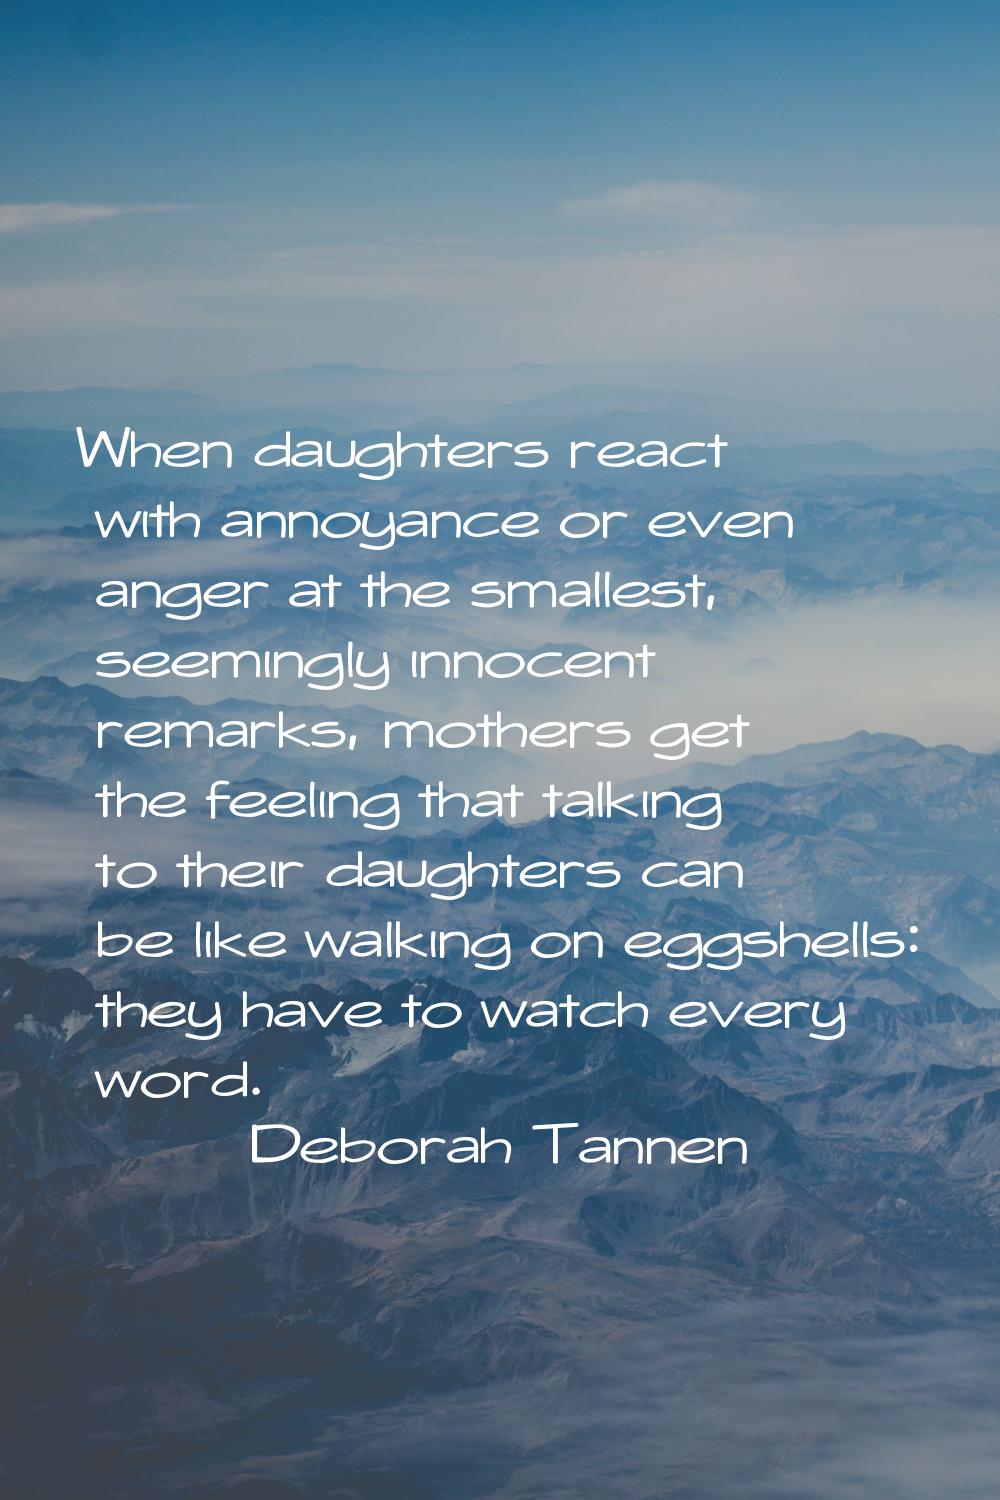 When daughters react with annoyance or even anger at the smallest, seemingly innocent remarks, moth